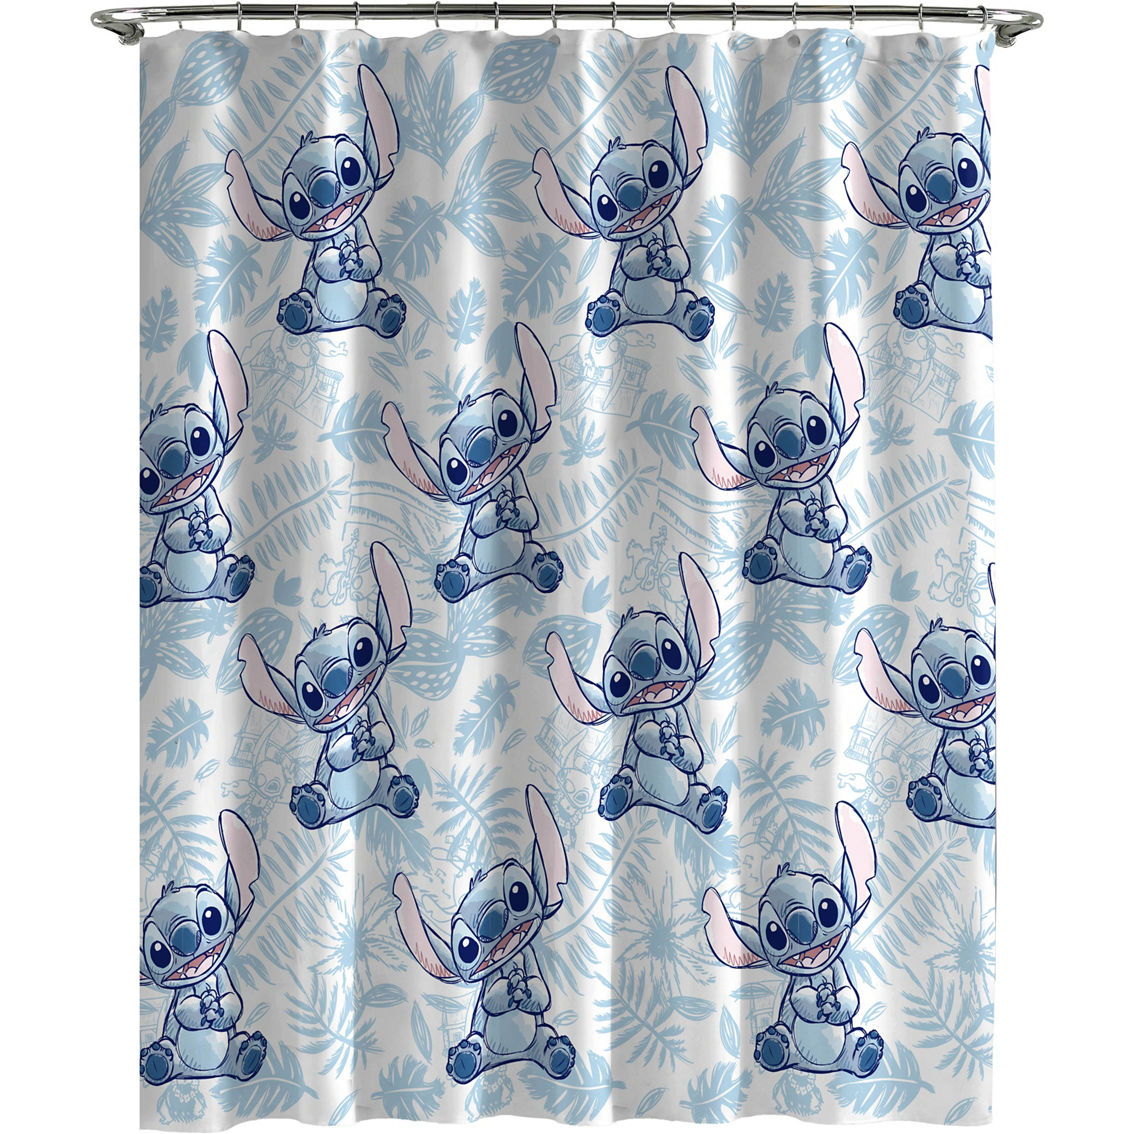 Disney Lilo And Stitch 70 X 72 In. Shower Curtain | Shower Curtains ...